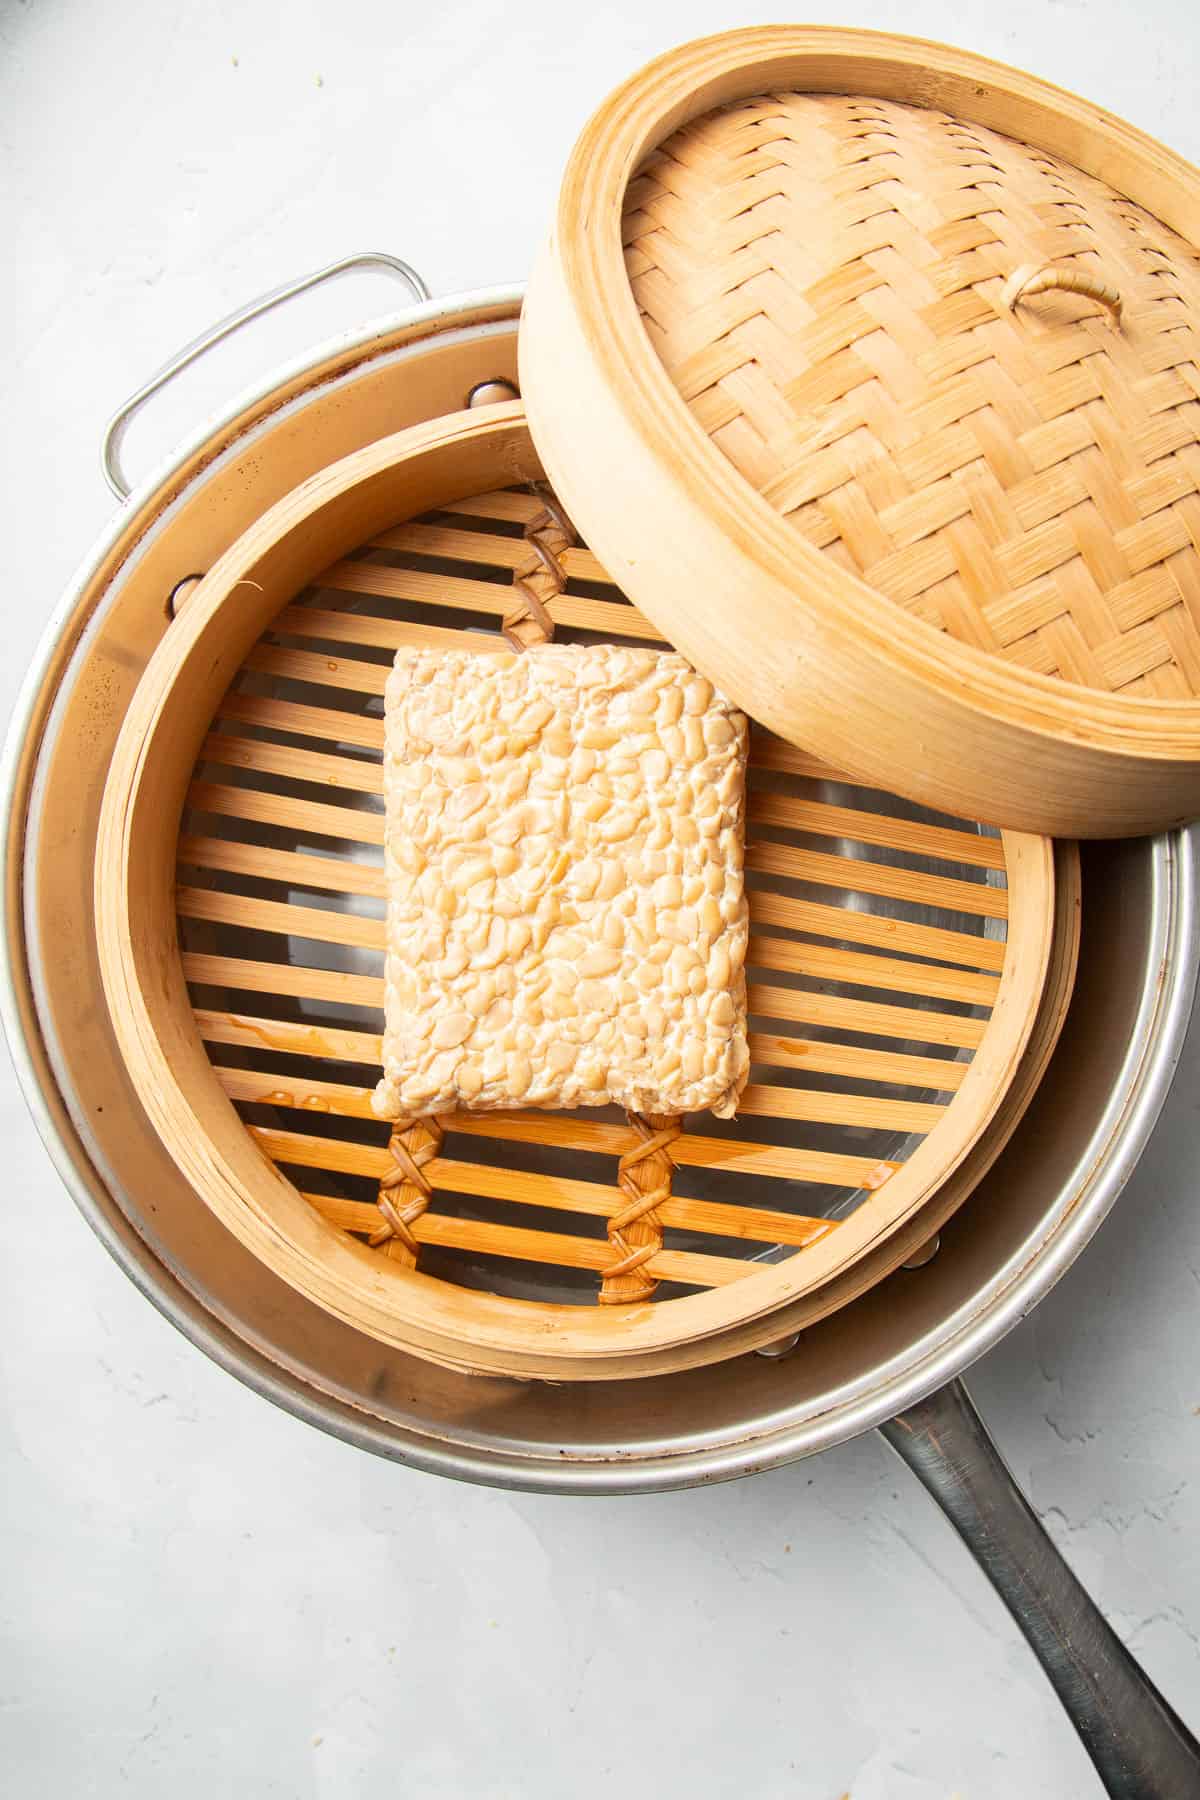 Block of tempeh in a bamboo steamer in a wok.